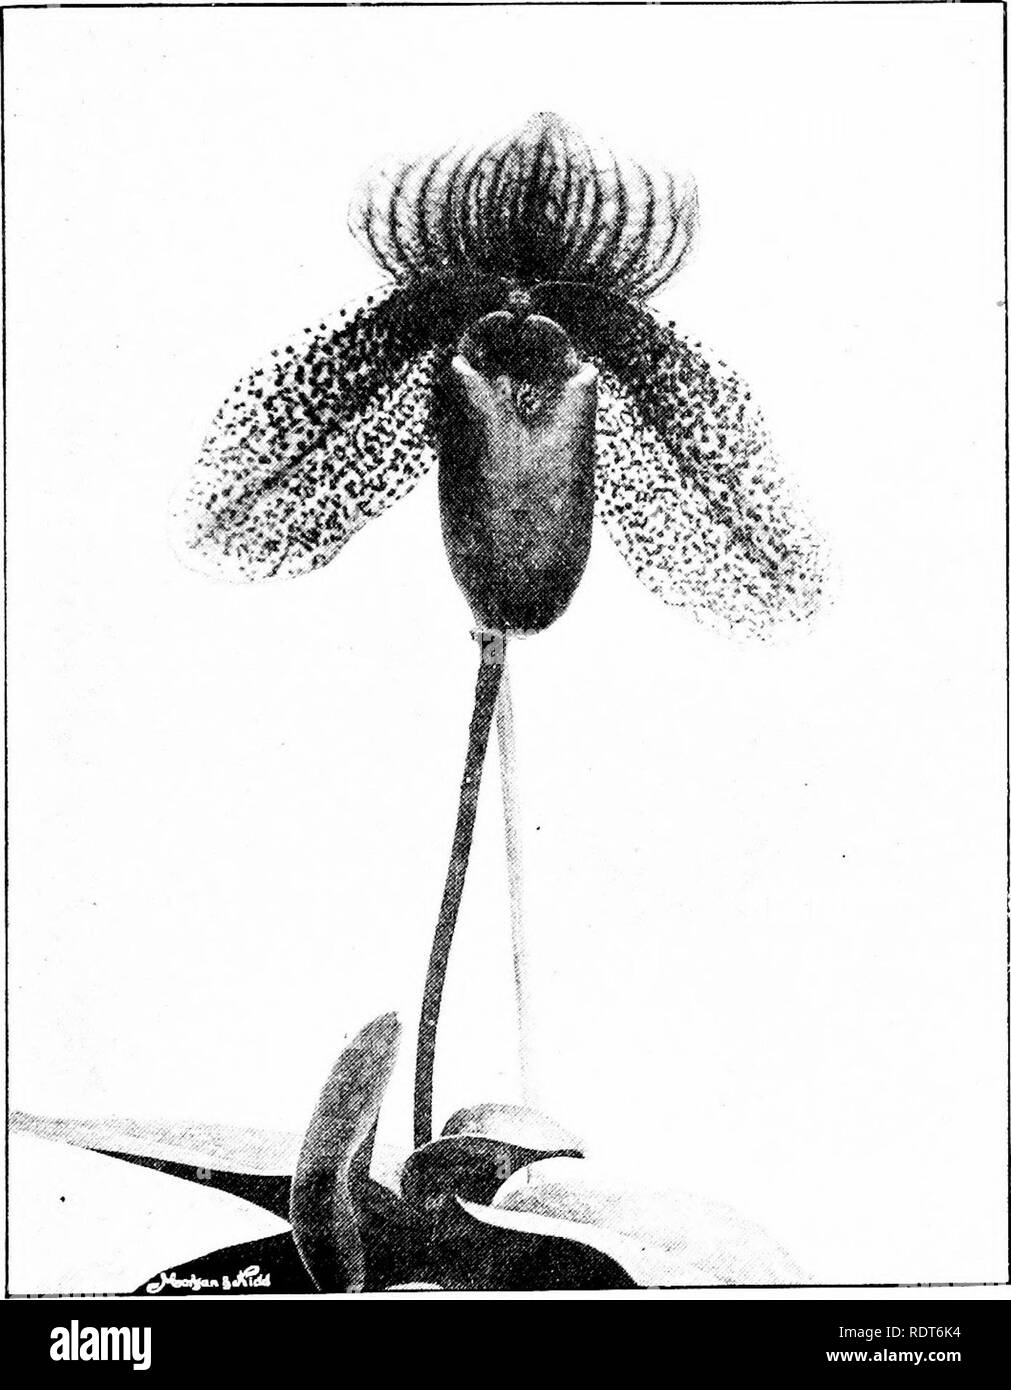 . The orchid stud-book: an enumeration of hybrid orchids of artificial origin, with their parents, raisers, date of first flowering, references to descriptions and figures, and synonymy. With an historical introduction and 120 figures and a chapter on hybridising and raising orchids from seed. Orchids. Part II. THE ORCHID STUD-BOOK. 149 C. x Cybele, Gard. &amp; For. 1892, 562 ; G.C. 1895, i. 199. C. x basileum, R. H. Mens. Cyp. ed. 2, 16.—R. H. Measures. C. x highfieldense, G.C. 1896, i. 530; O.R. 1896, 159; Gard. 1896, i. 316 (&quot; highfieldianum &quot;).—Burton. C. x Drurio-Lawrenceanum, 0 Stock Photo